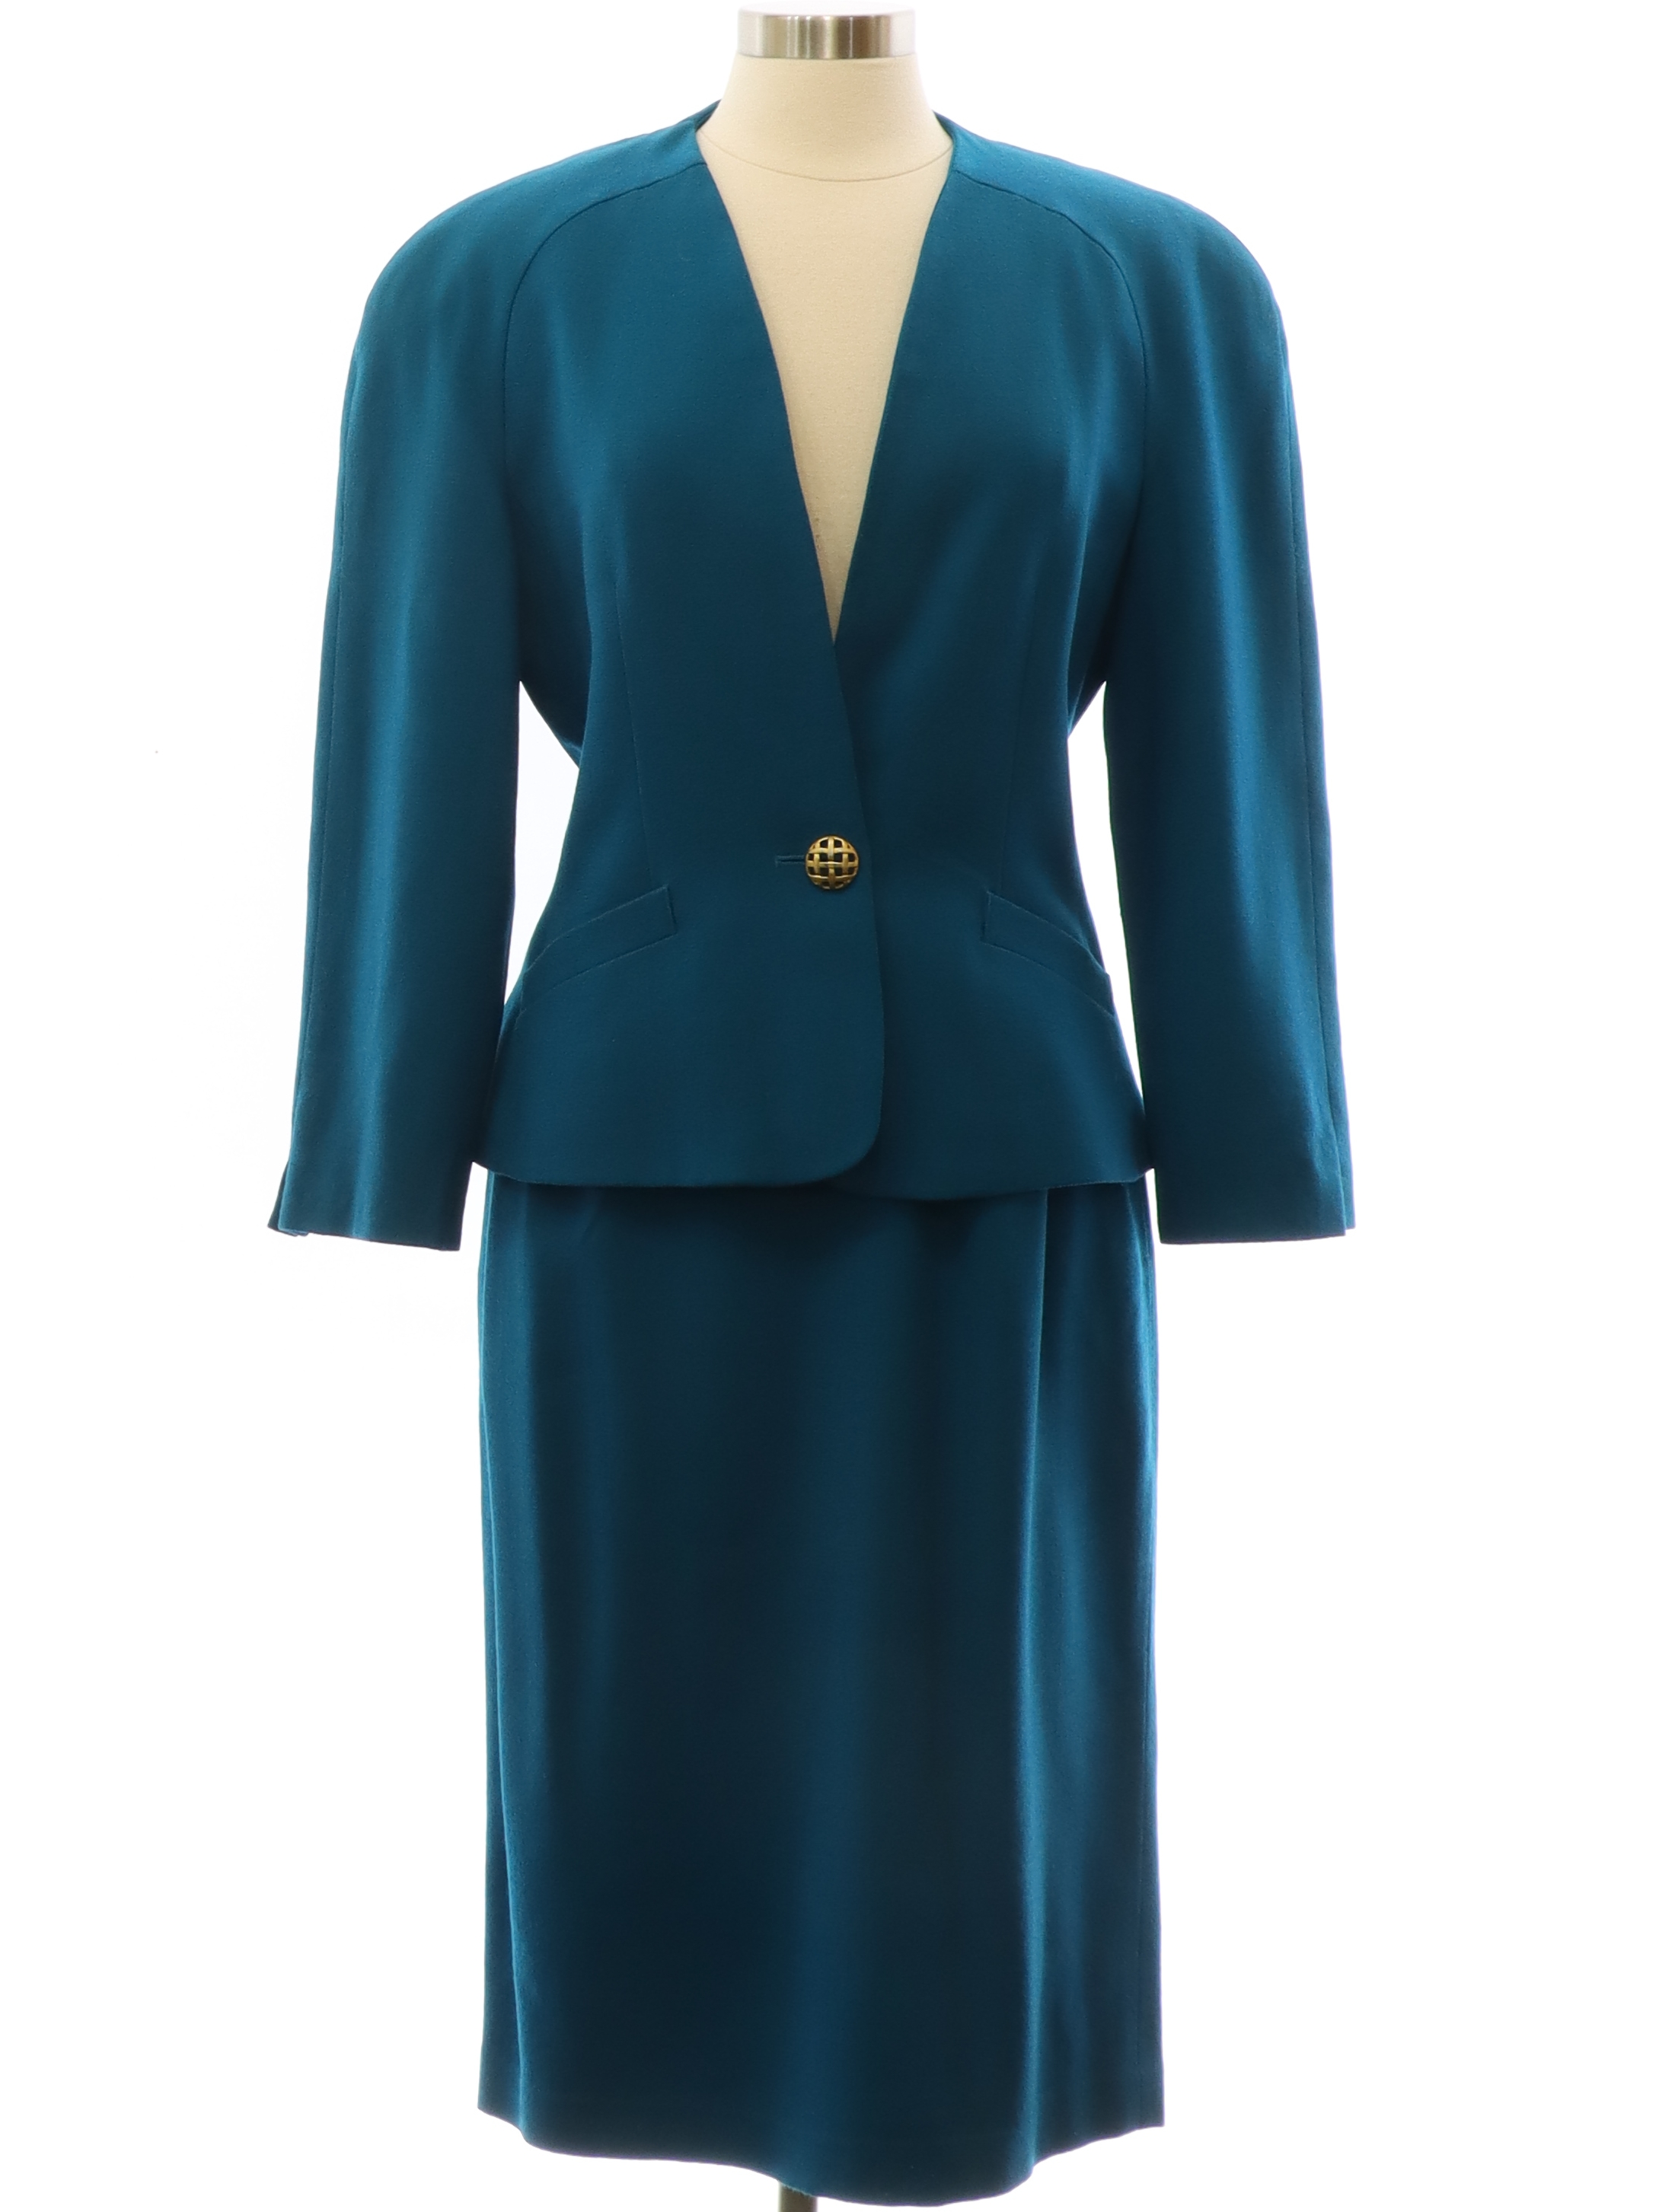 Eighties Kasper Suit: 80s -Kasper- Womens sea blue wool two piece mid  length skirt suit. Longsleeve jacket, padded shoulders, shaping darts for a  tapered fit, single button closure with a basket weave